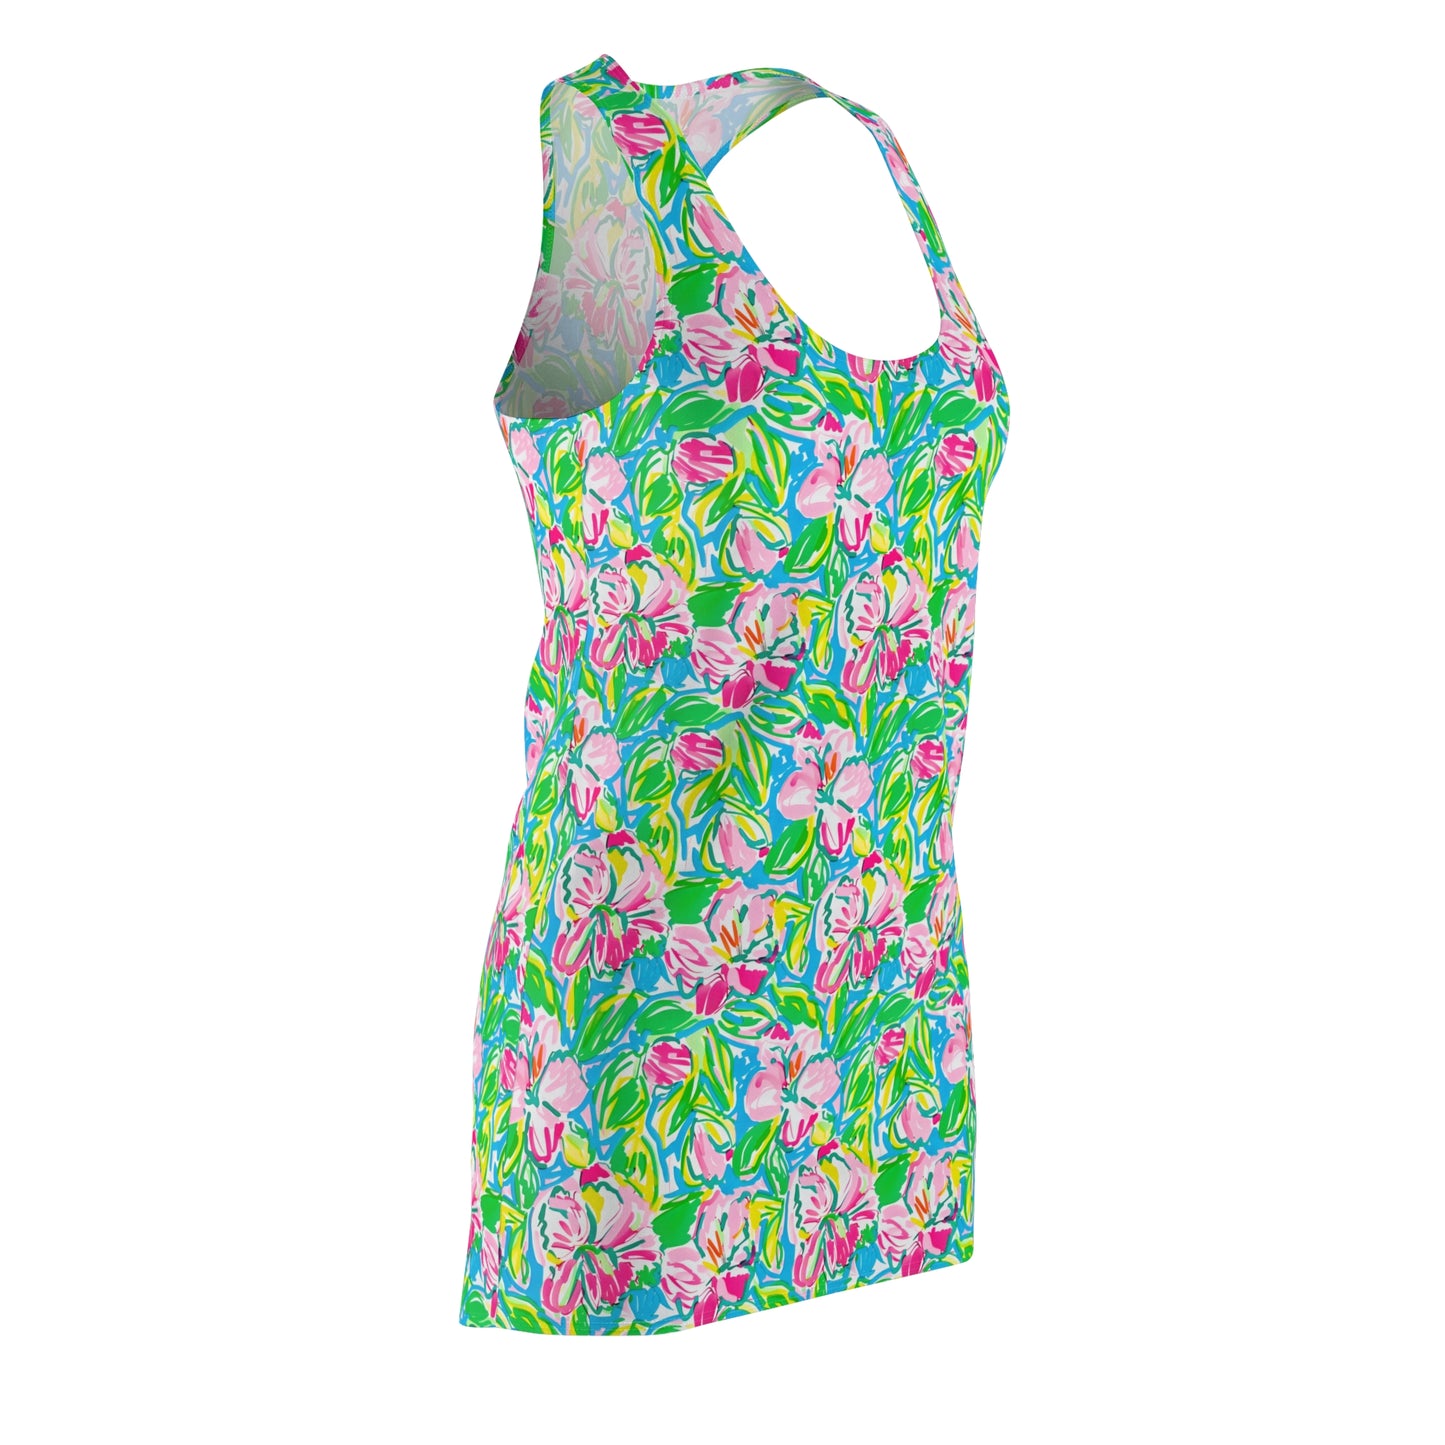 Whispering Meadows: Pink Blossoms, Lush Green Leaves, and Accents of Yellow and Blue Women's Racerback Dress XS - 2XL